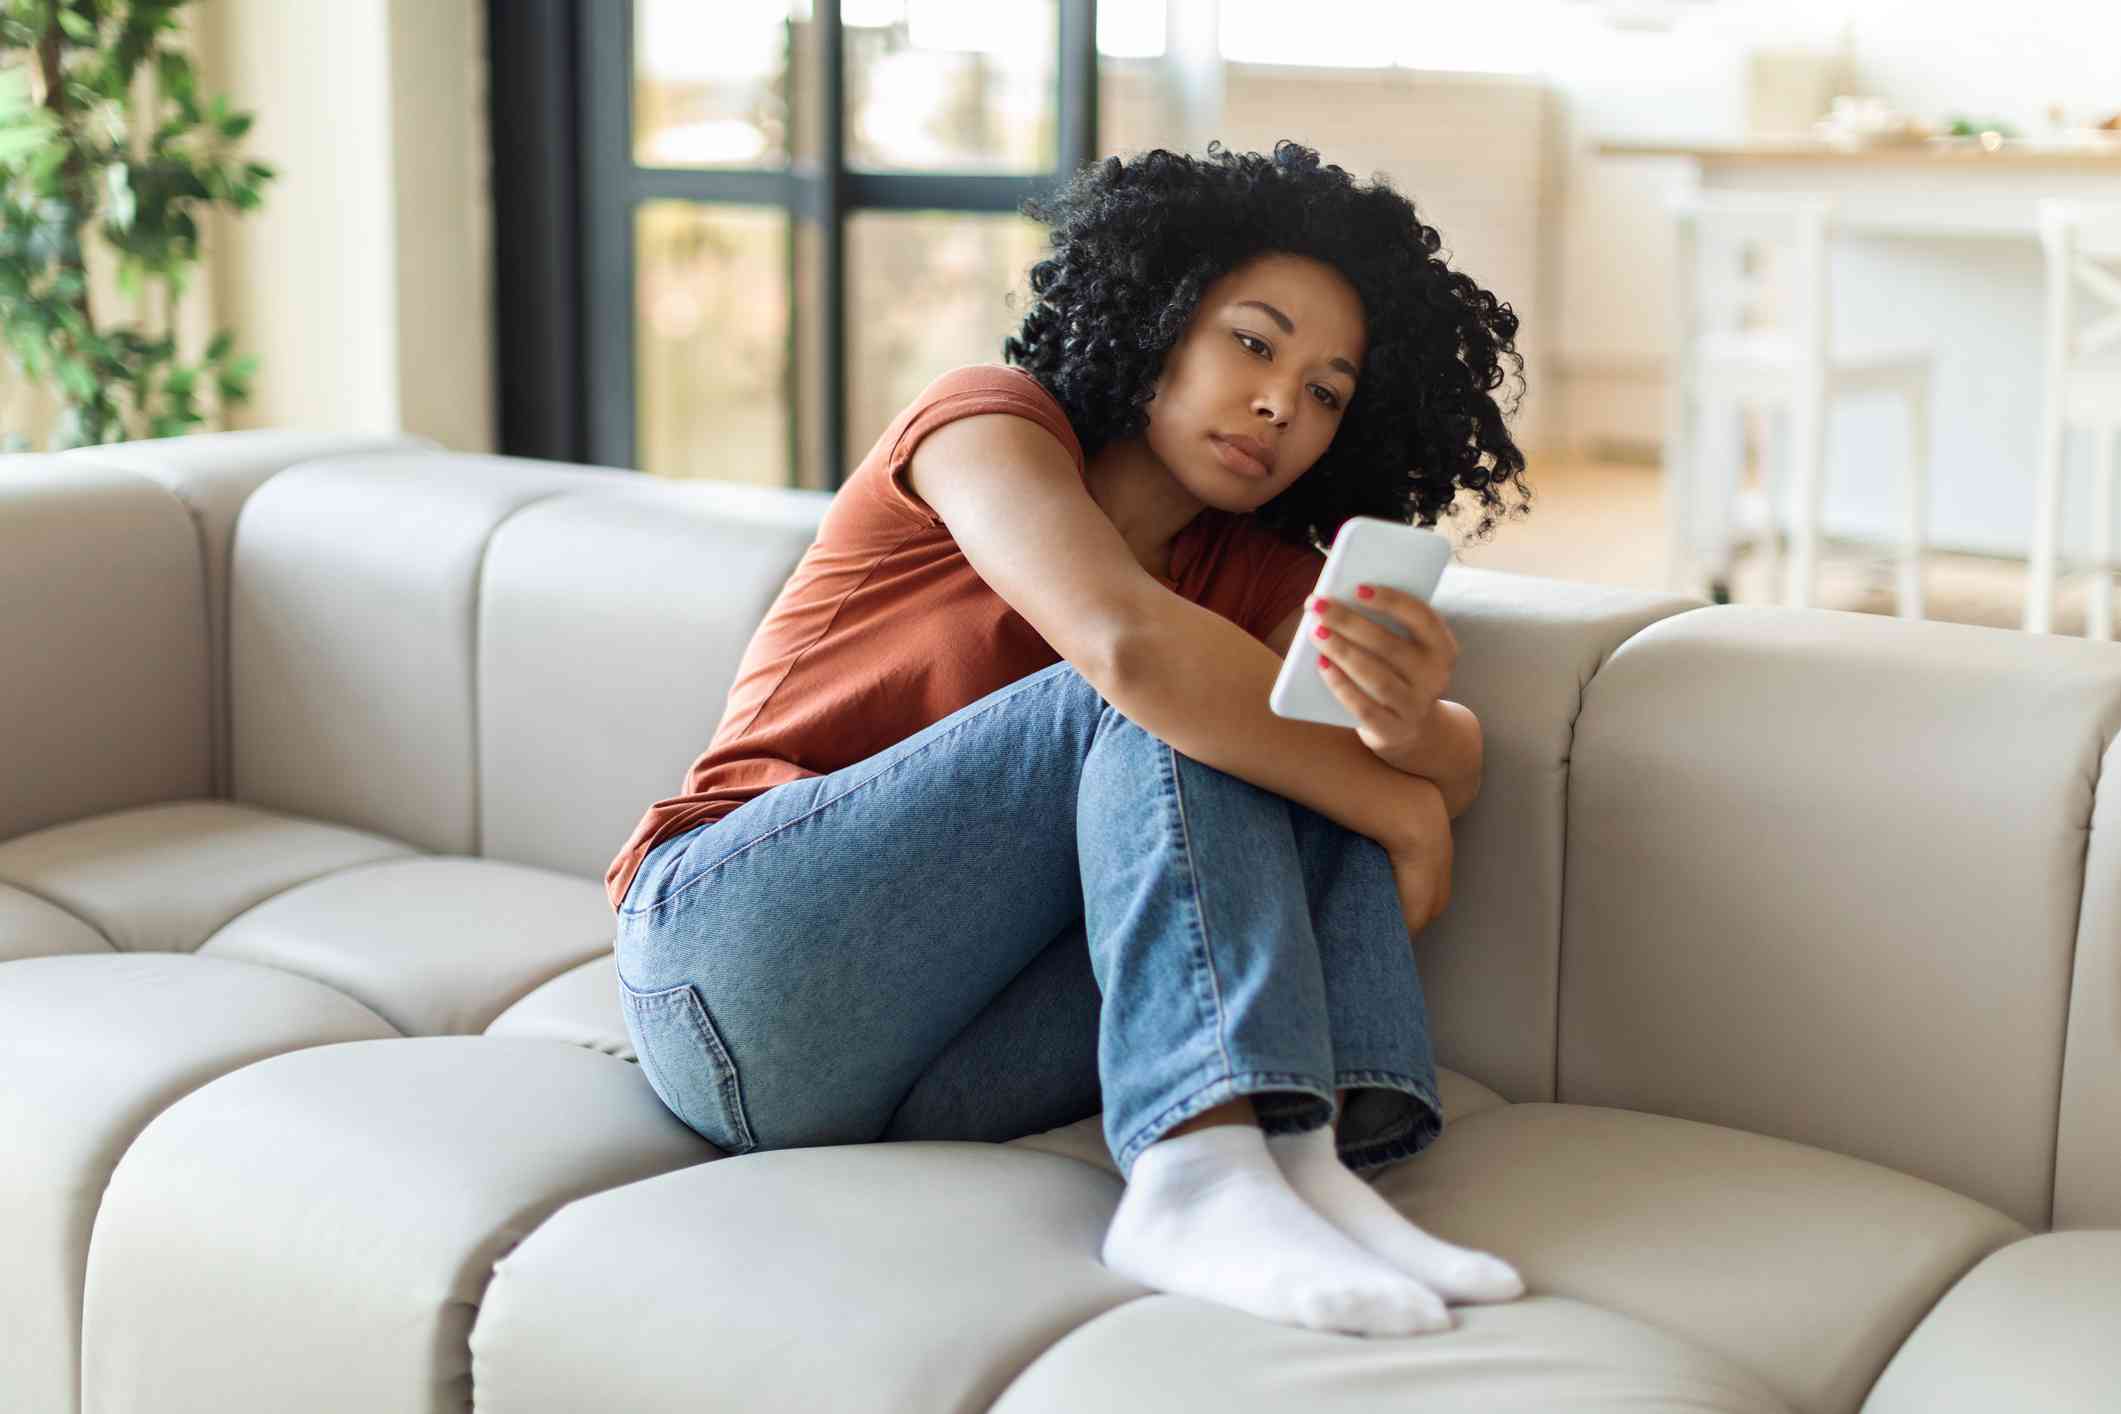 A woman in an orange shirt sits curled up on the couch and sadly looks at the phone in her hand.